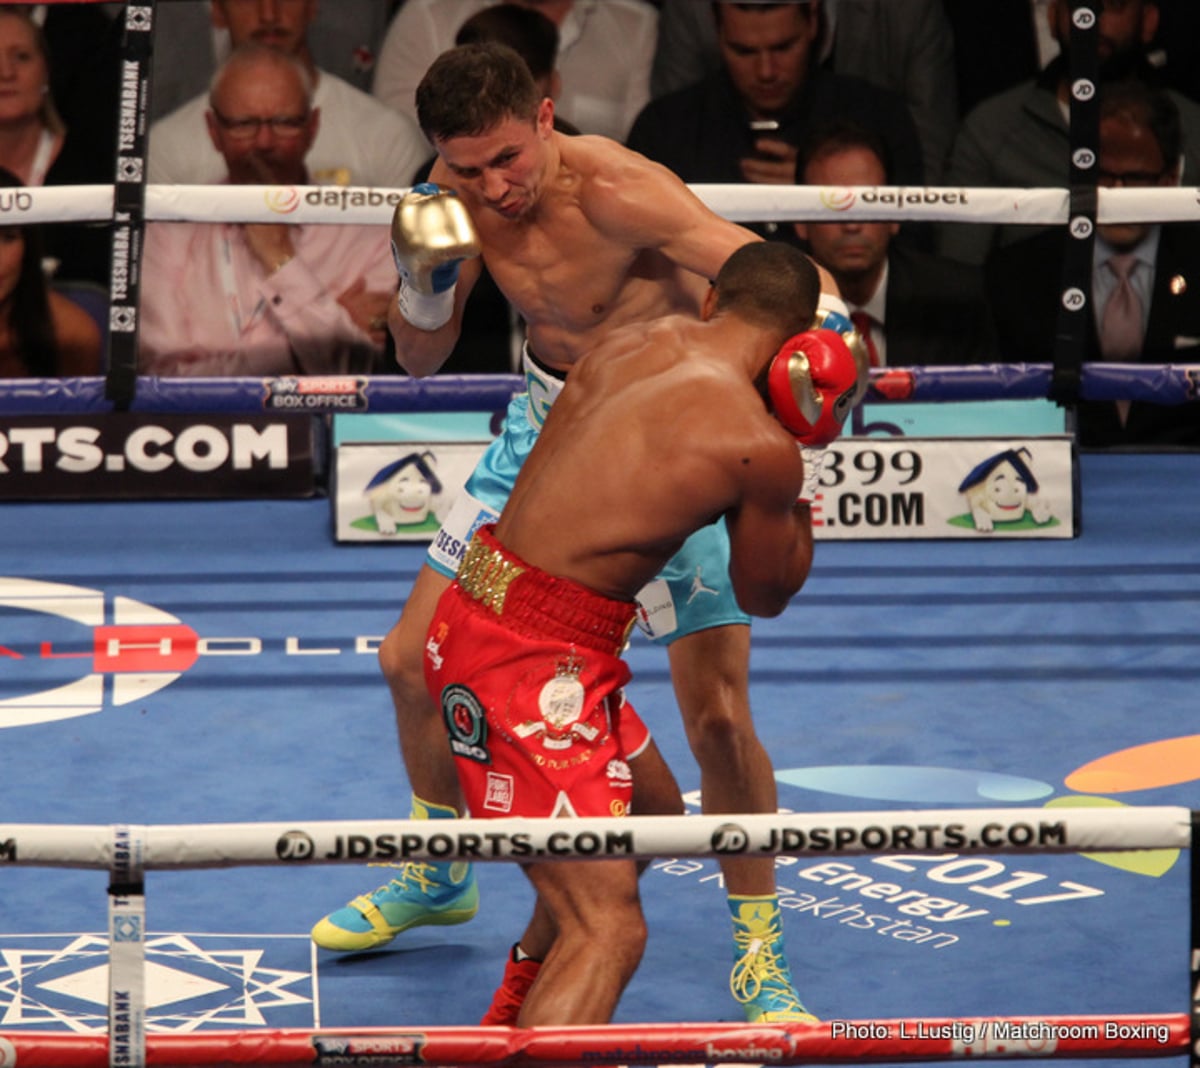 Kell Brook On Gennady Golovkin Challenge: “It Was The Hardest I've Ever Been Punched”